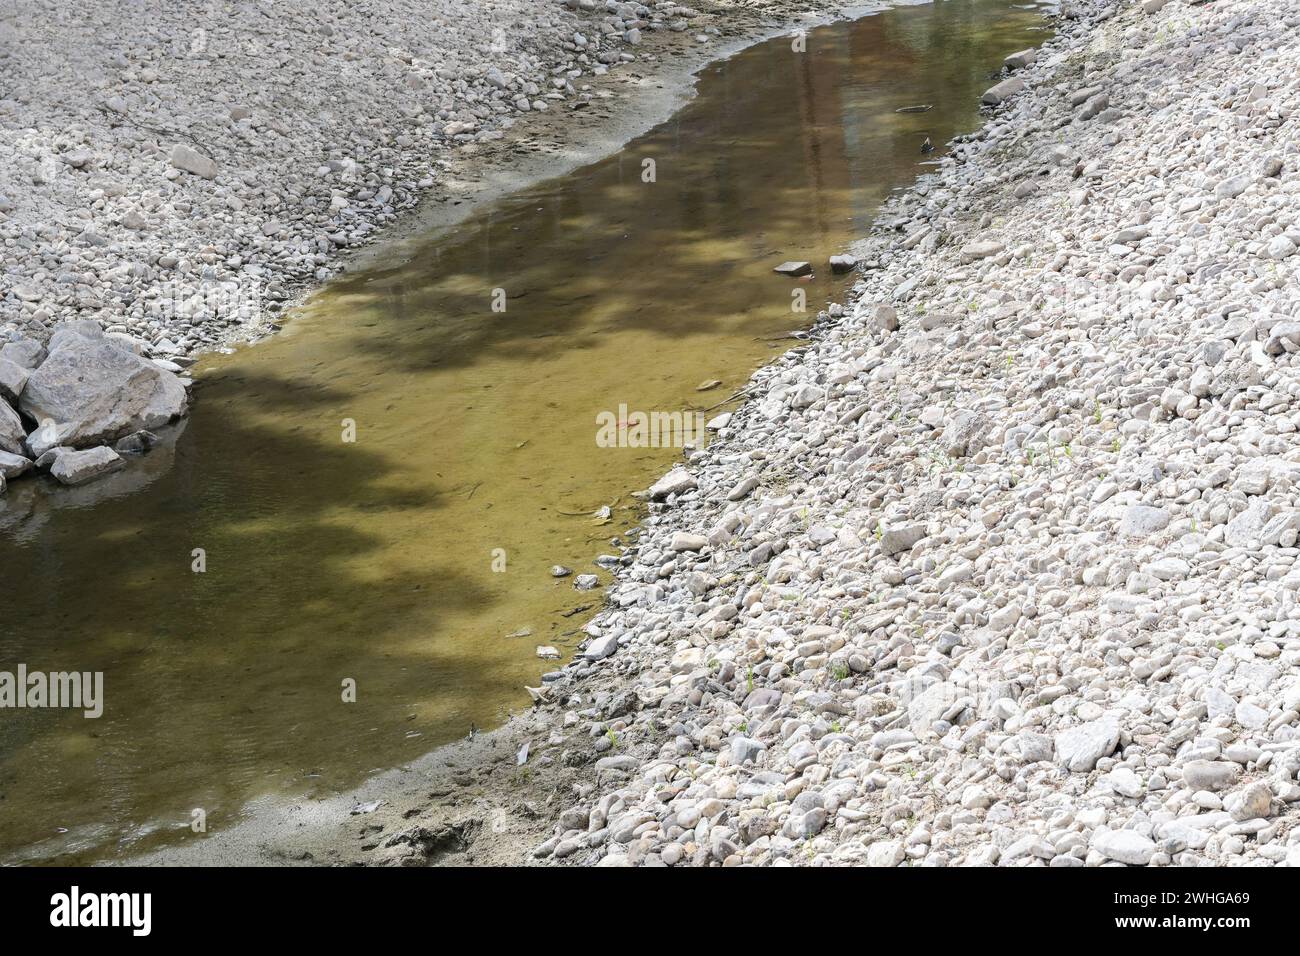 Almost dried up river bed after a longer heat period, effect of global climate change, ecology concept, copy space Stock Photo